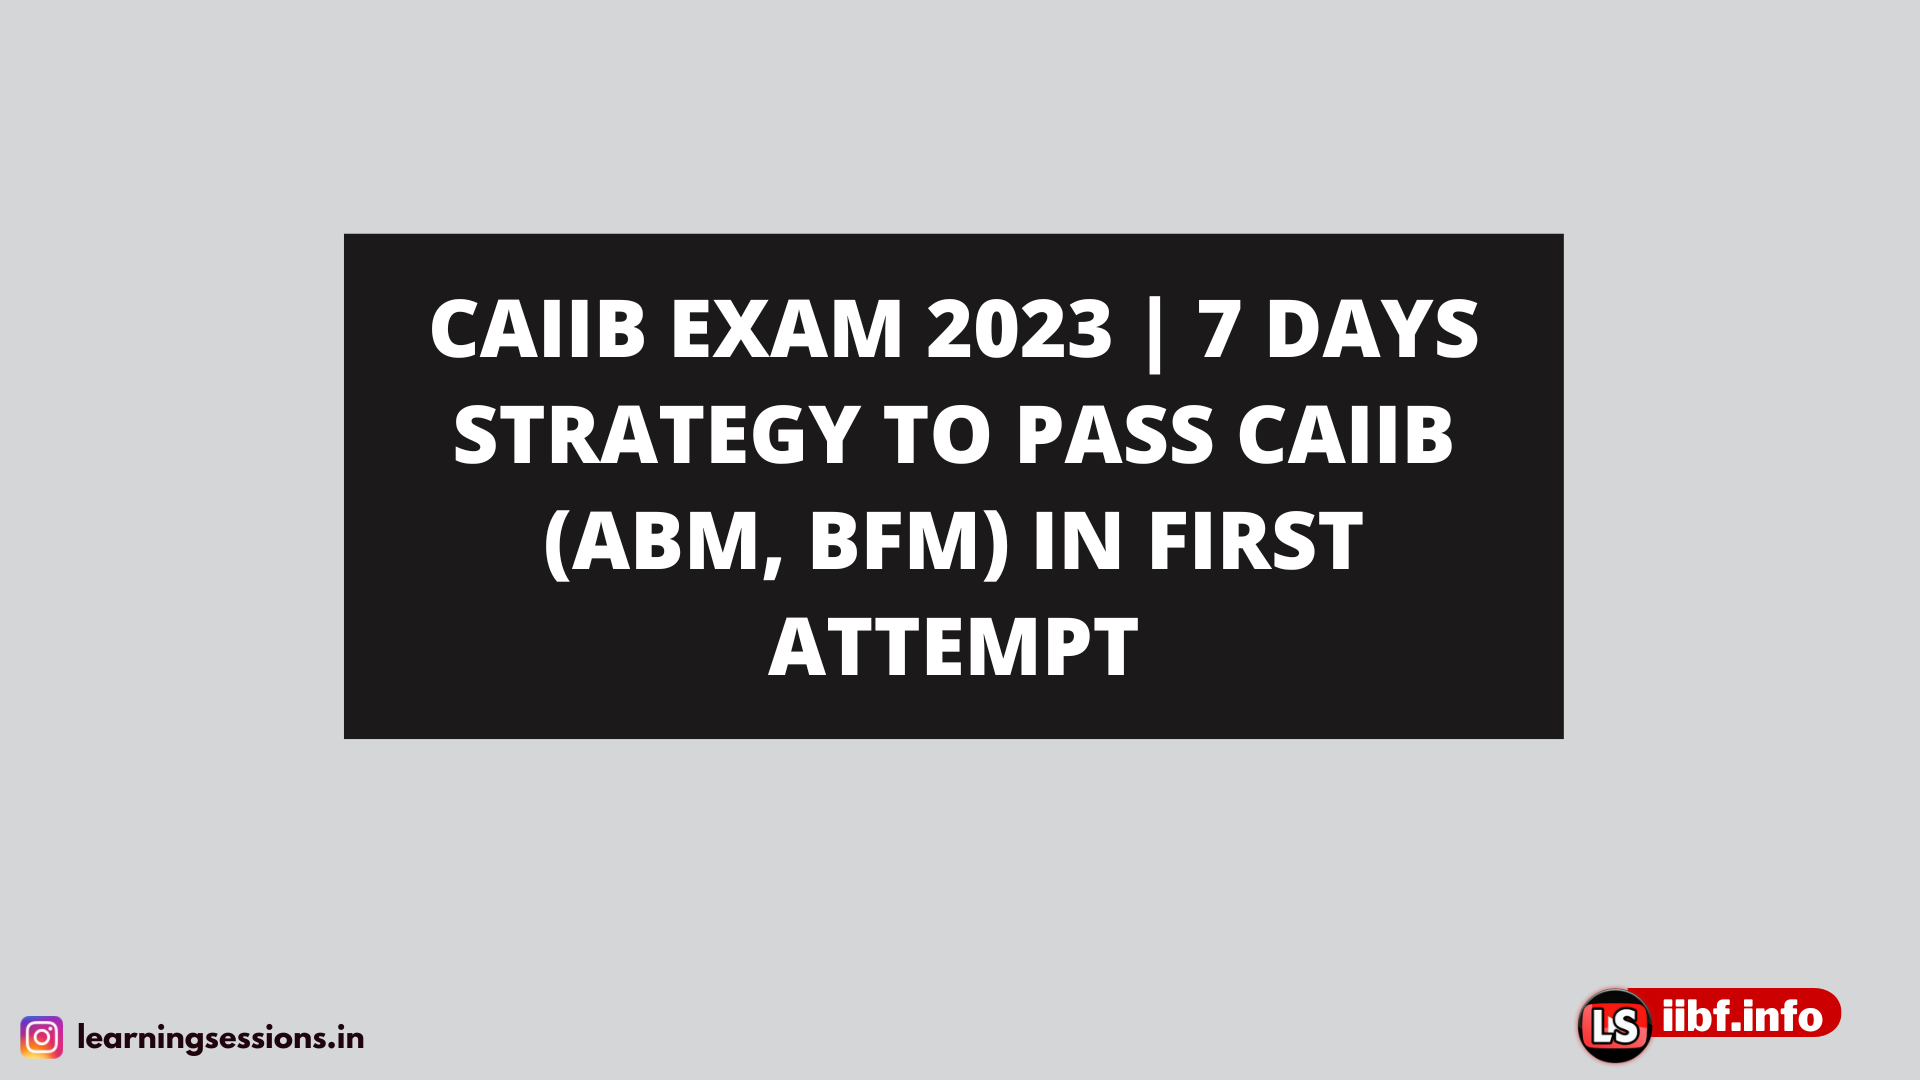 CAIIB EXAM 2022 | 7 DAYS STRATEGY TO PASS CAIIB (ABM, BFM, RETAIL BANKING) IN FIRST ATTEMPT